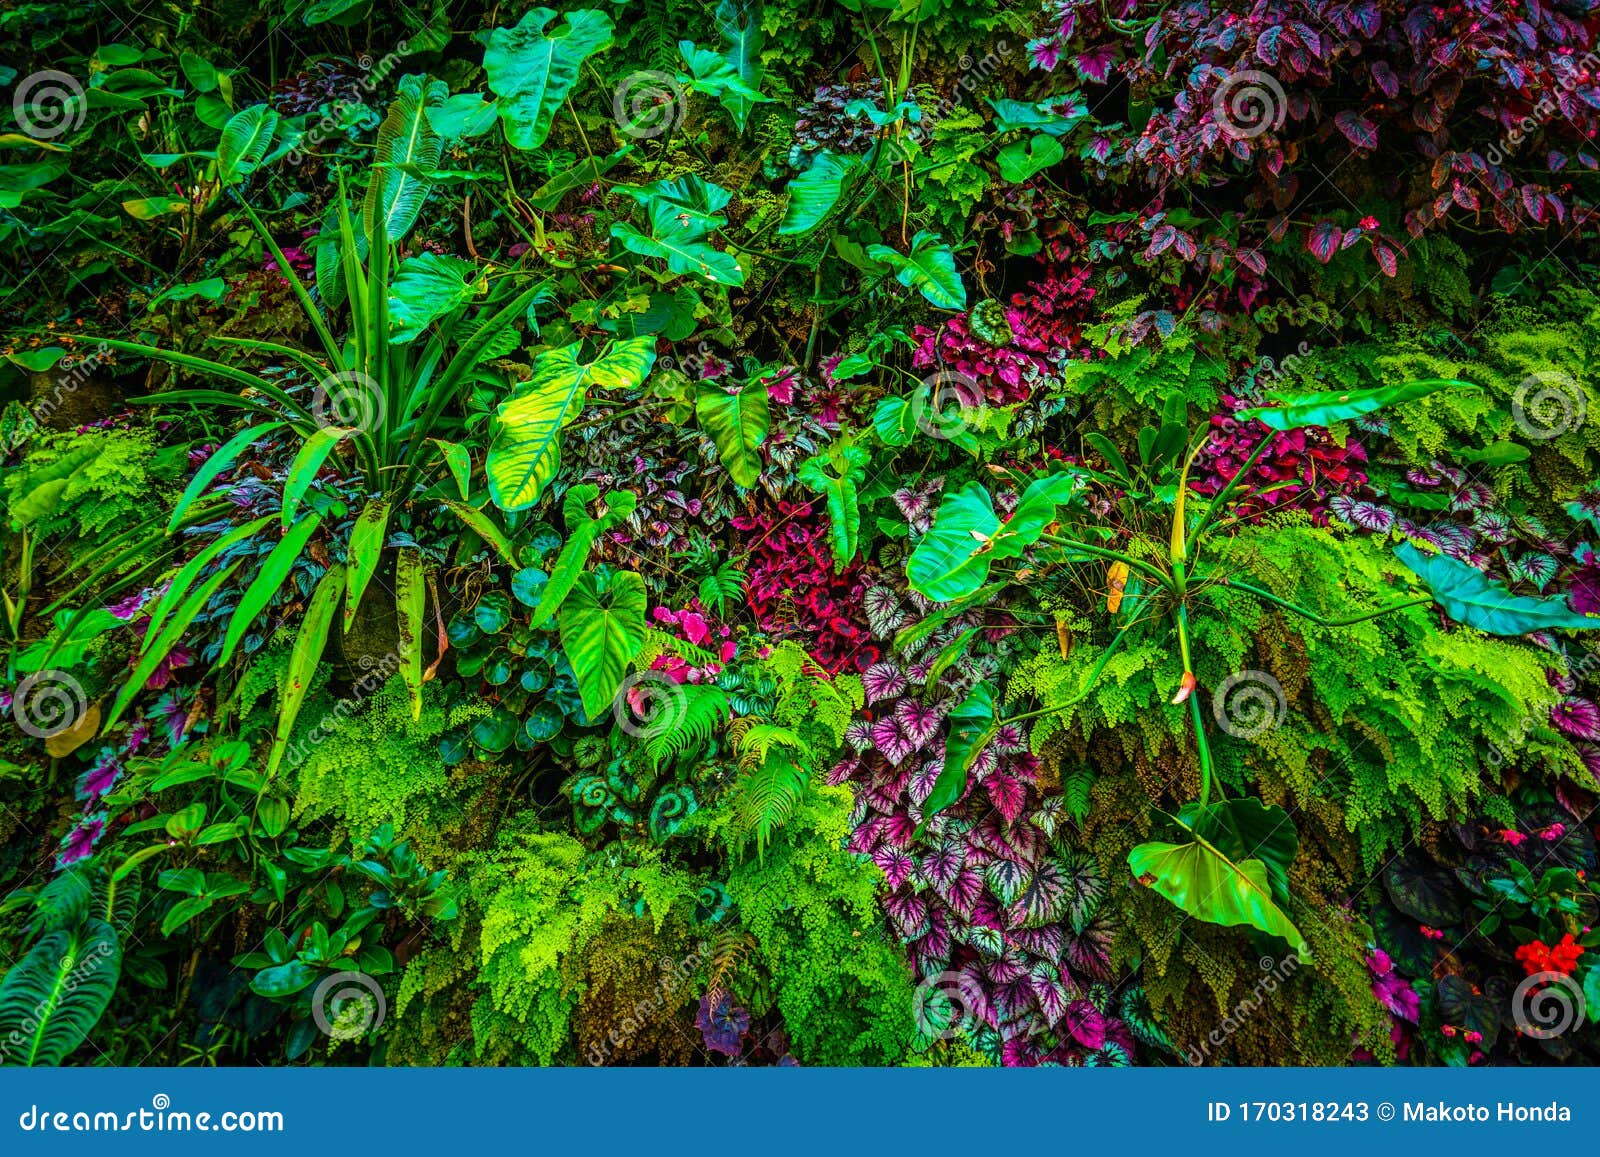 Flora of the Tropical Jungle Stock Image - Image of dense, tropical:  170318243